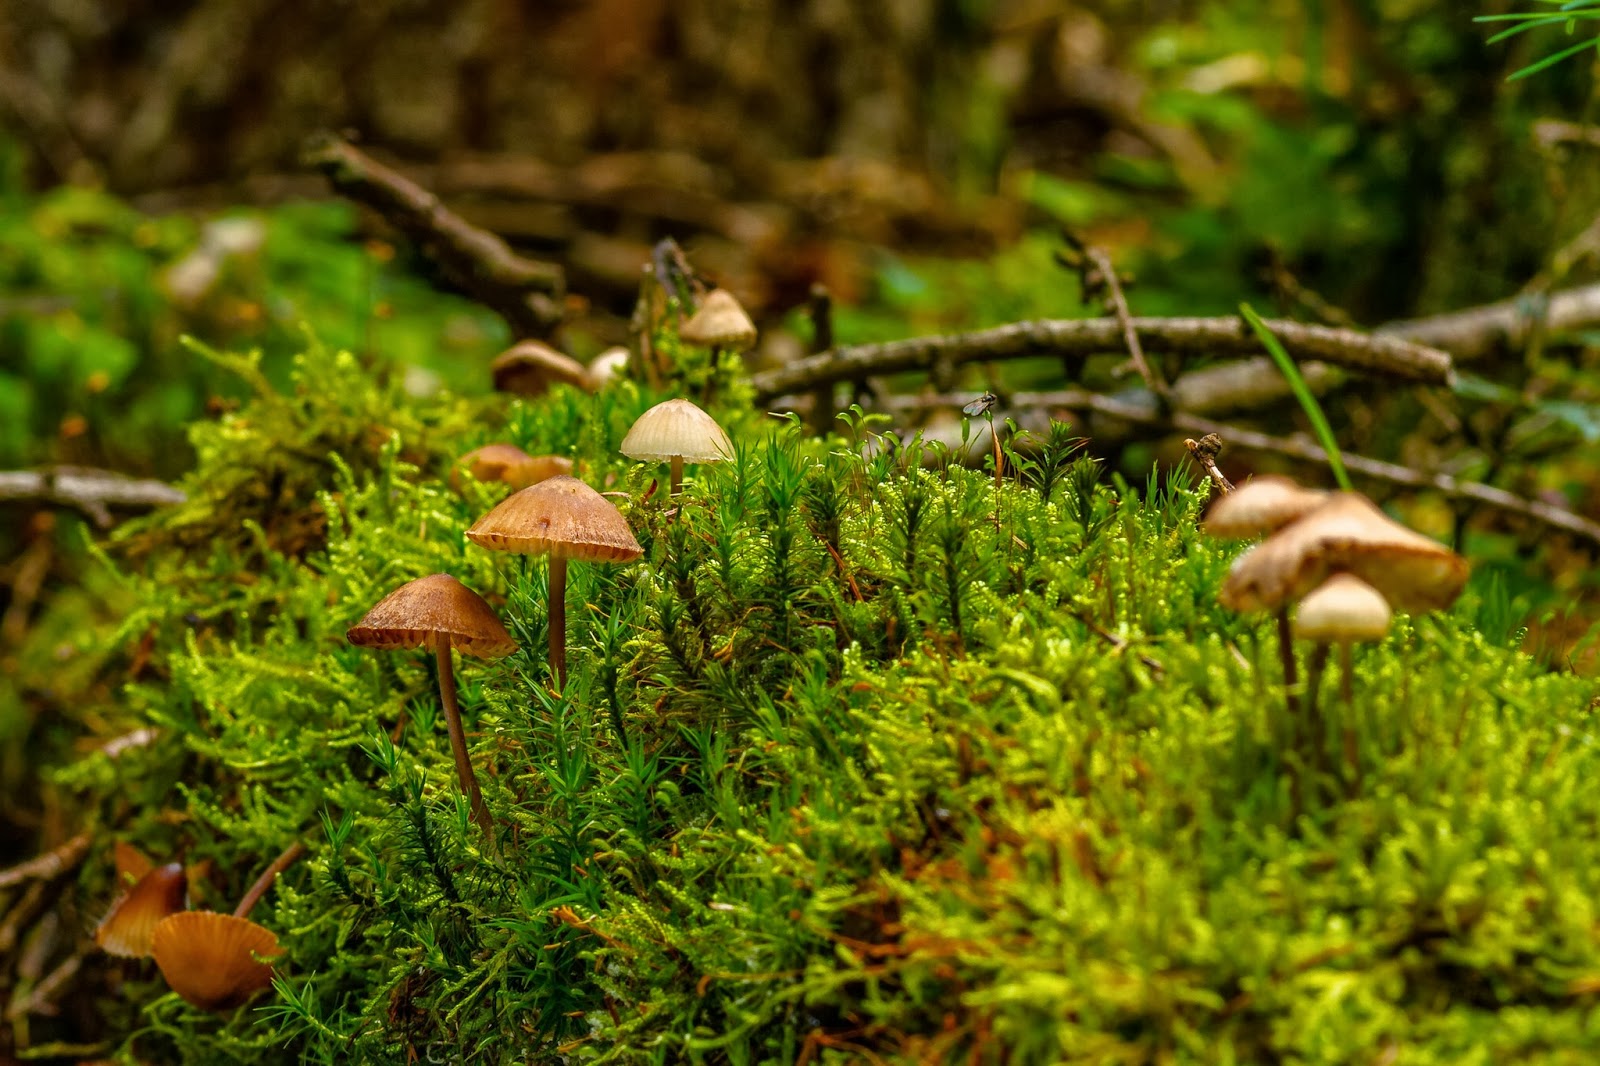 Photography: Pilze im Wald (Mushrooms in the wood)